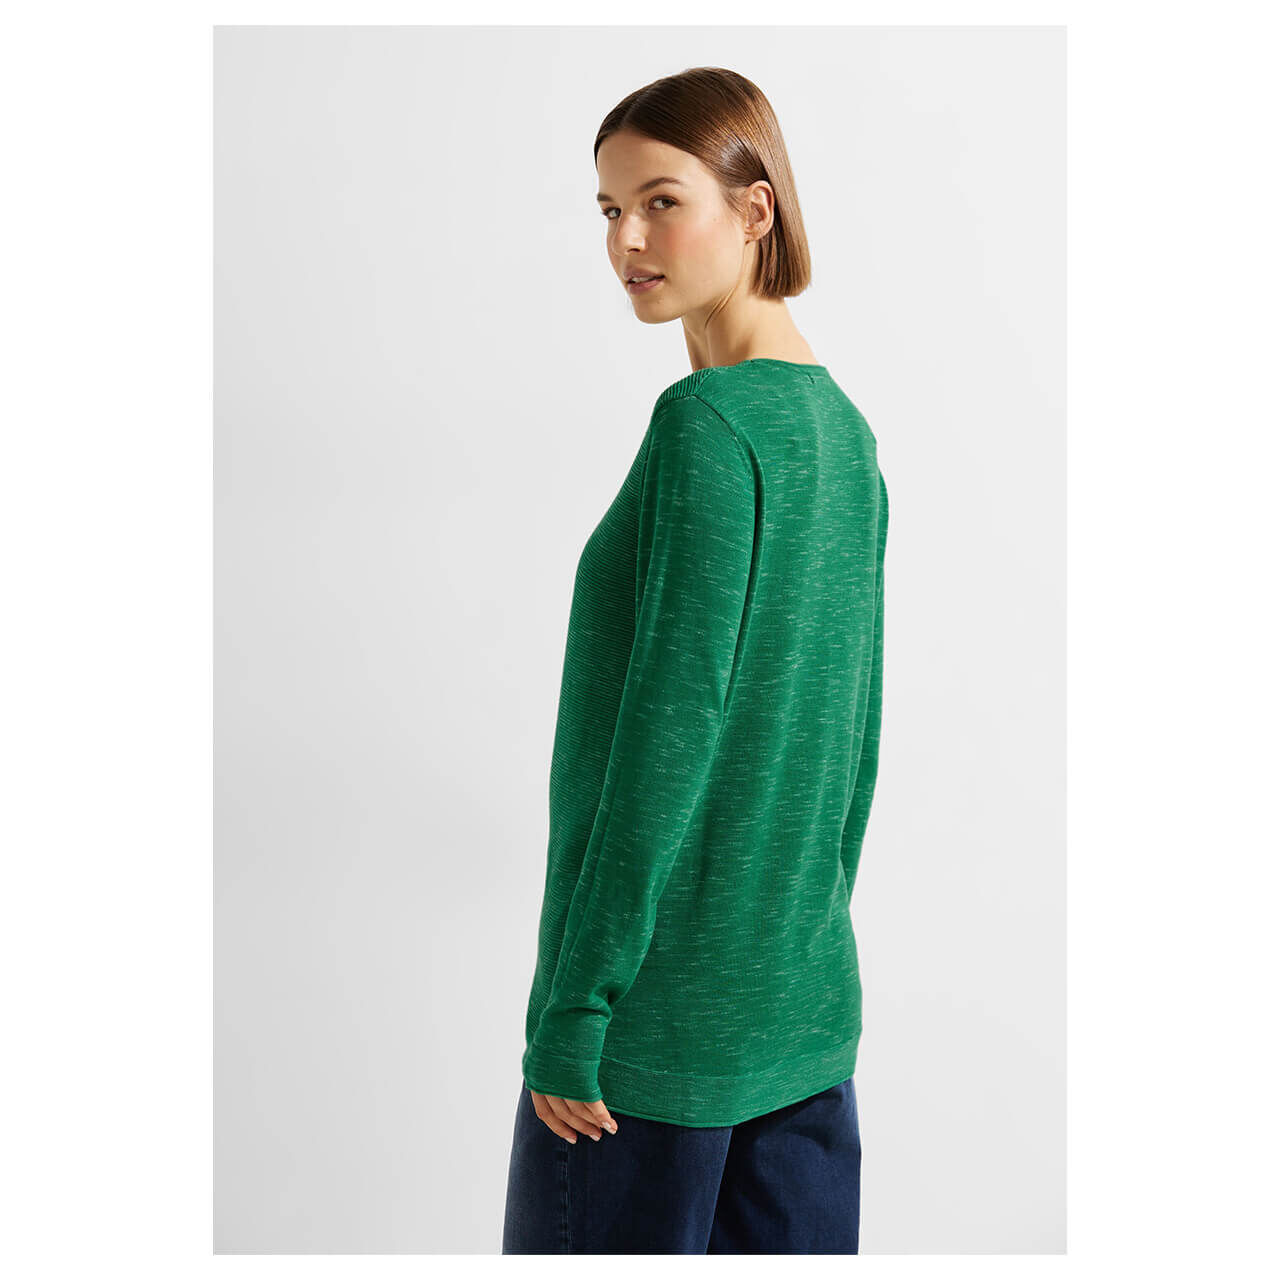  Cecil Damen Pullover Structured Roundneck heather easy green